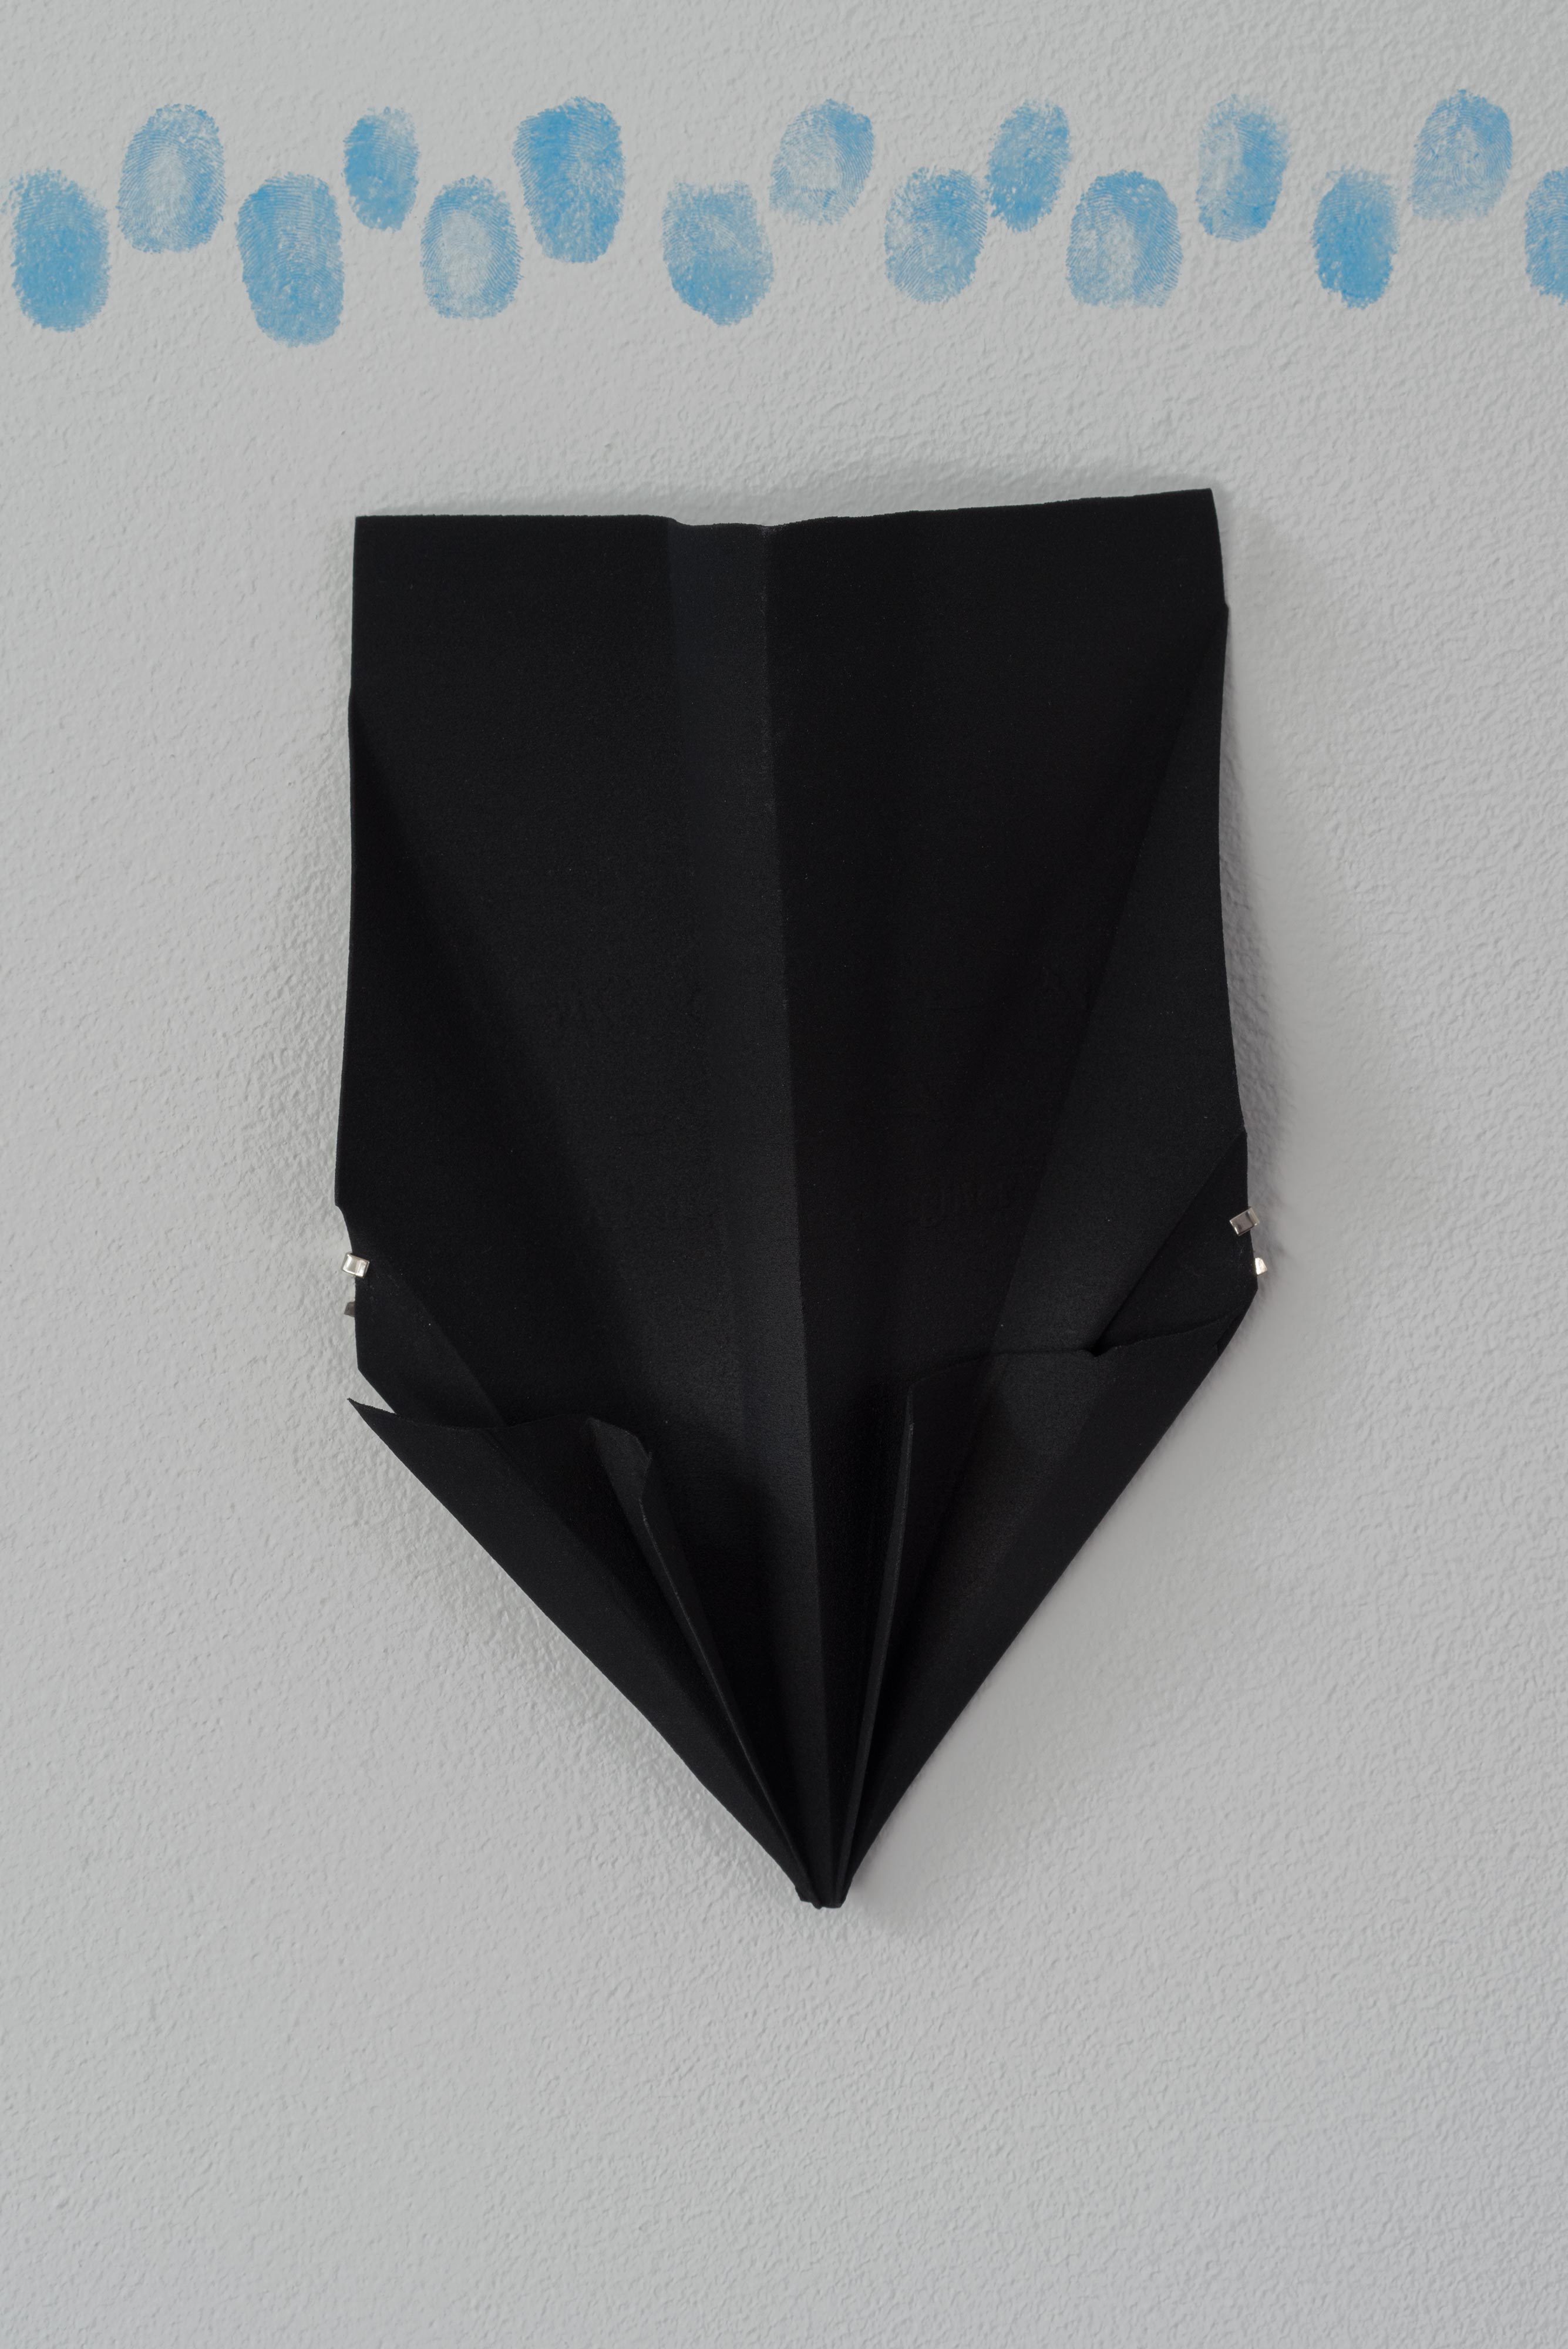 David Muenzer<br>Sconce (This is Water, Black)<br>2016<br>Porous Nylon<br>4.938 x 8.028 in (12.5 x 20.4 cm)